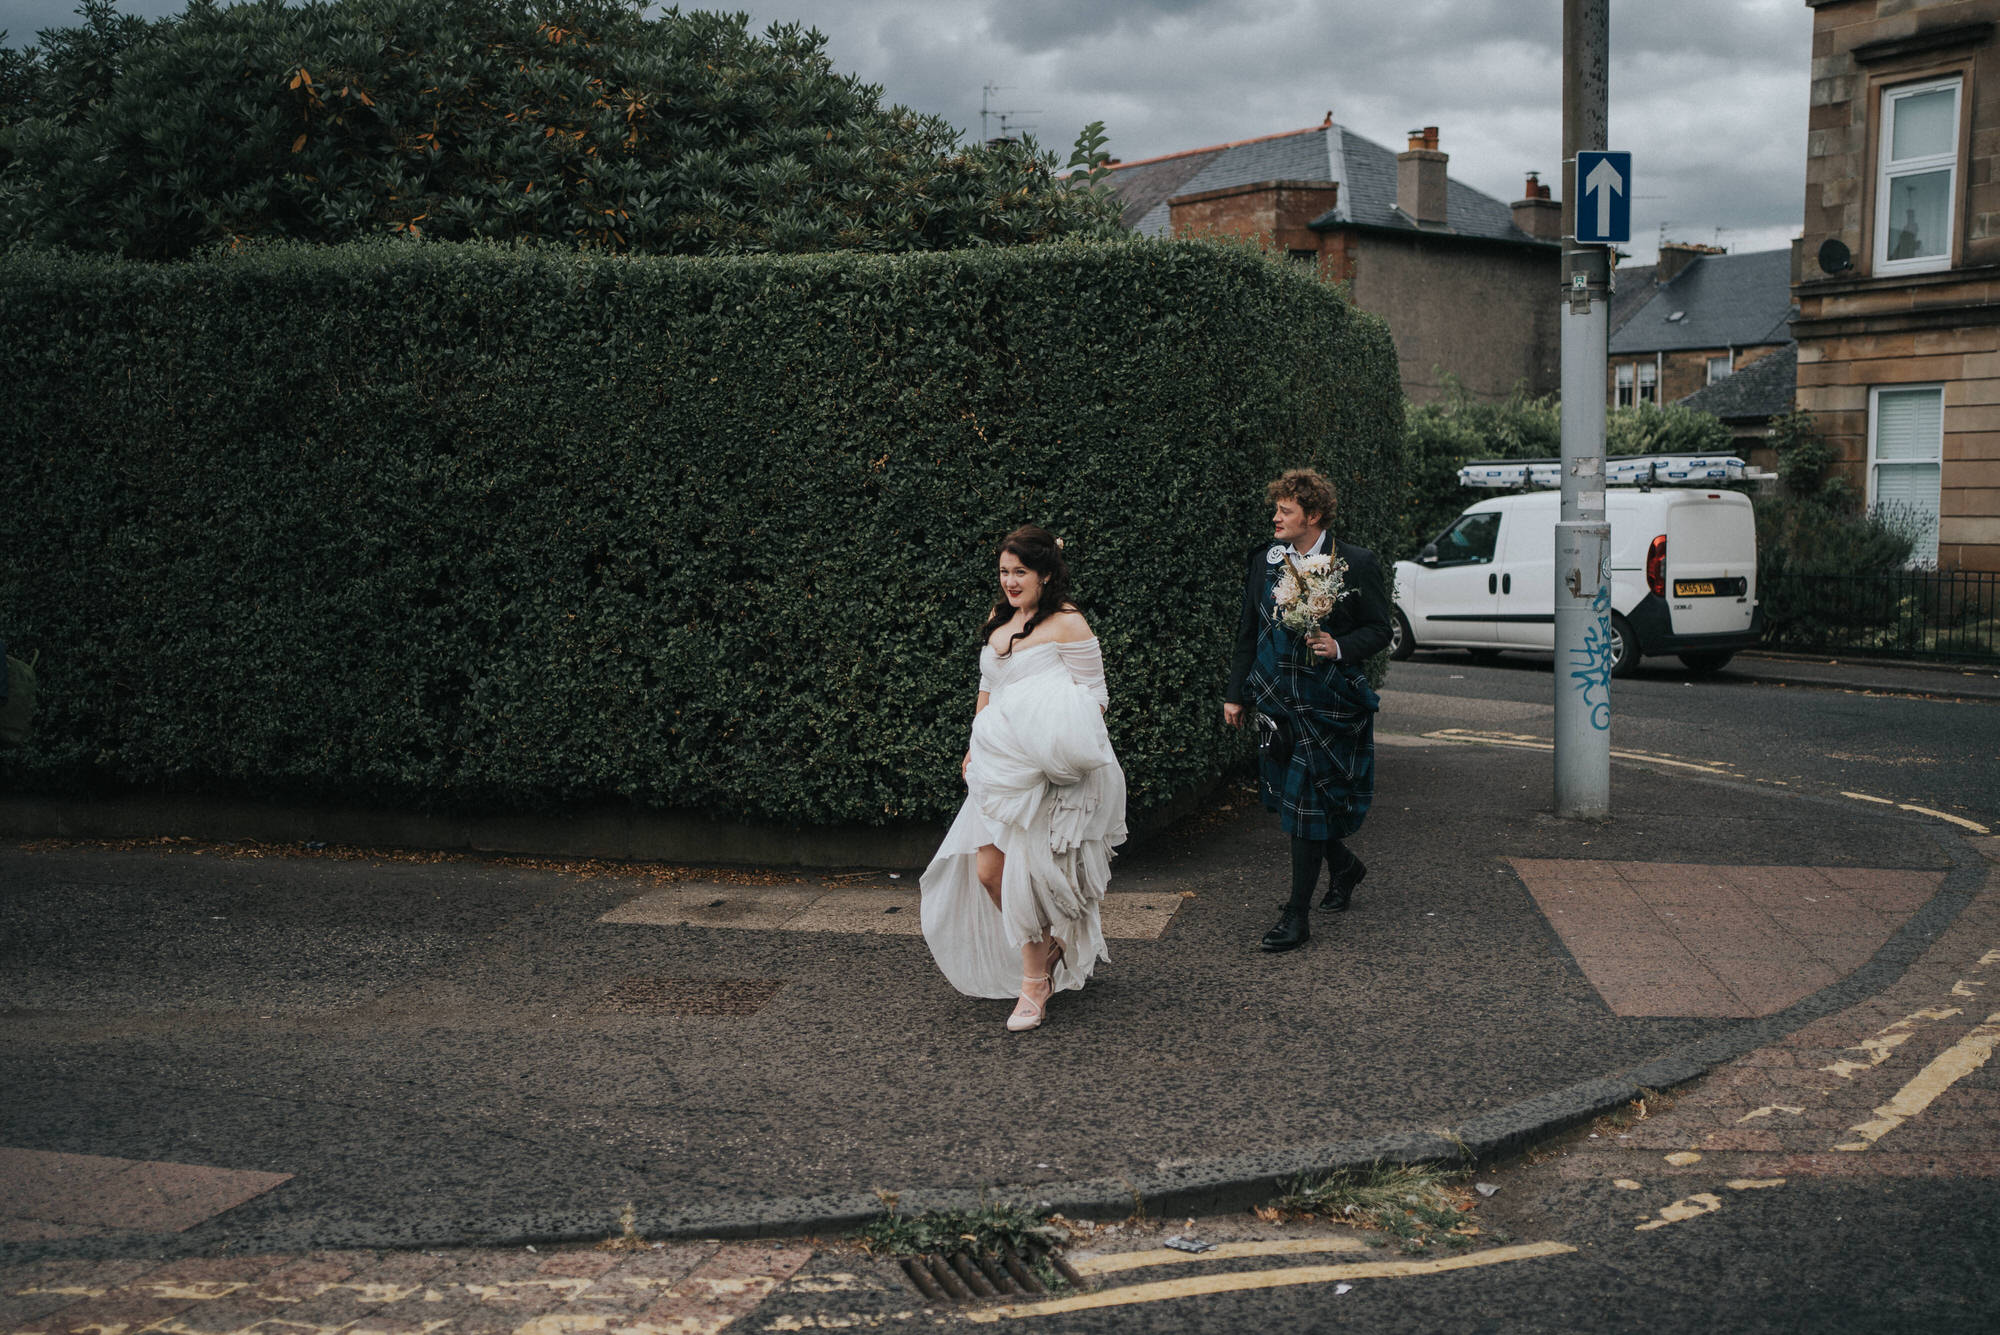 A bride and groom walk through the streets of Glasgow